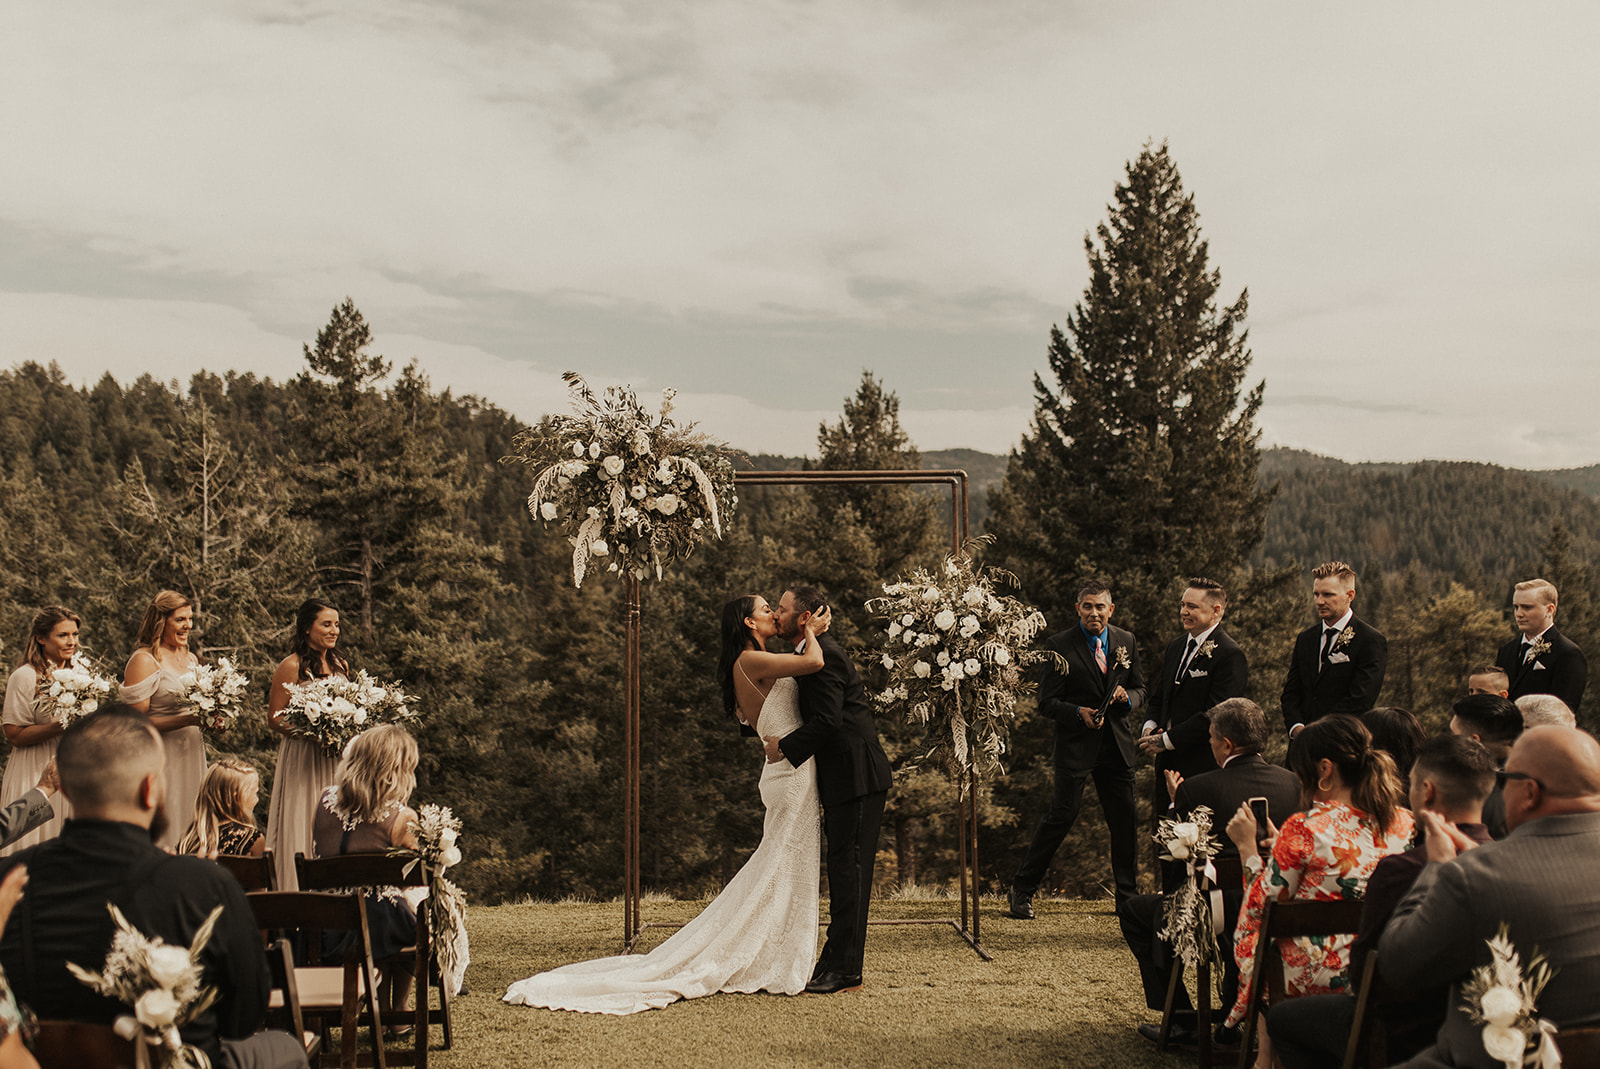 Should You Have An Indoor or Outdoor Wedding? wedding tips from a wedding planner